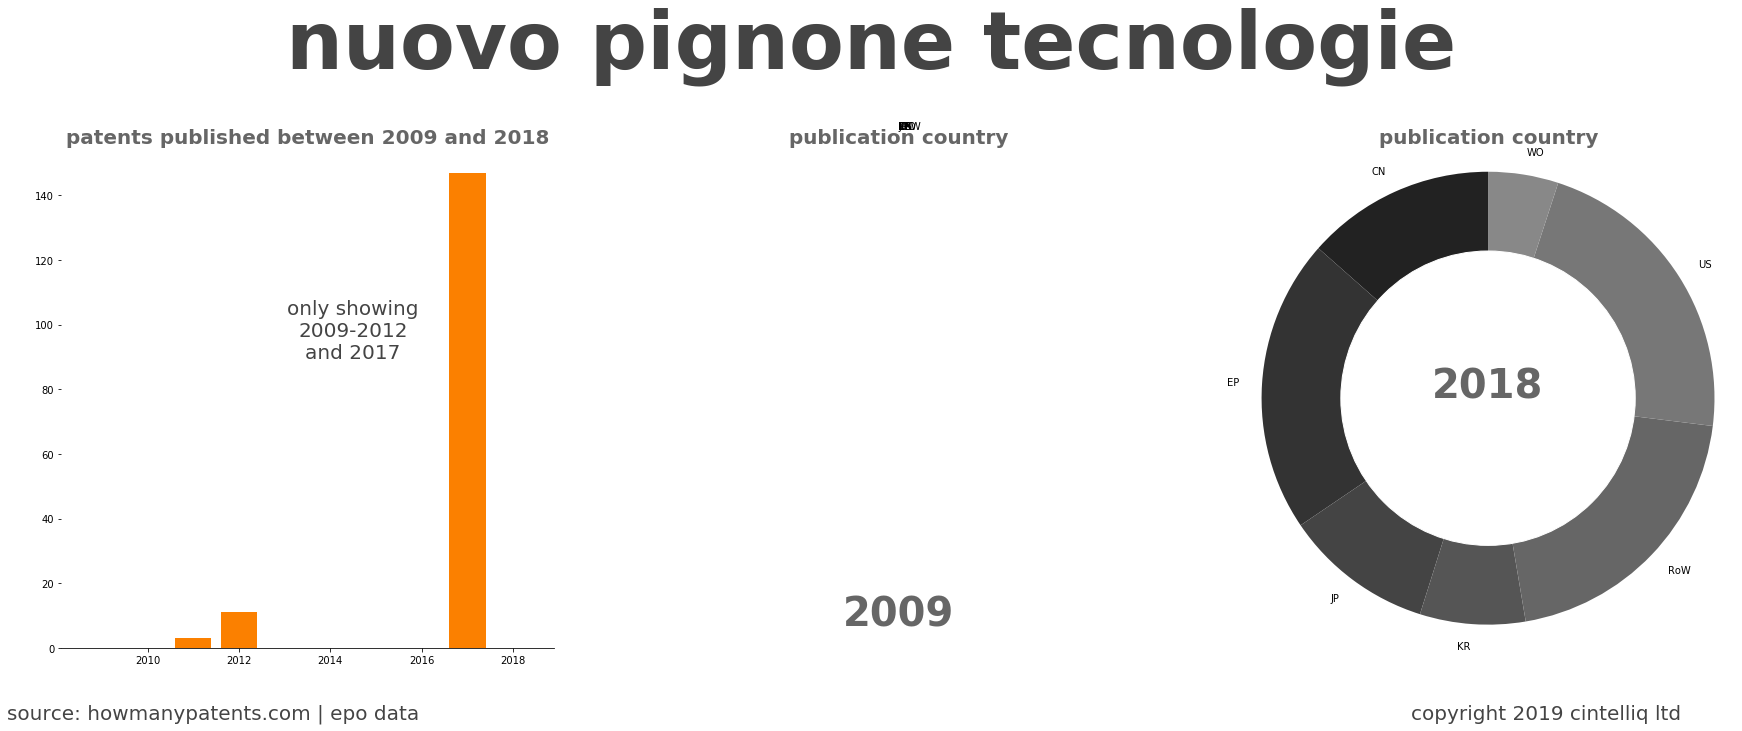 summary of patents for Nuovo Pignone Tecnologie